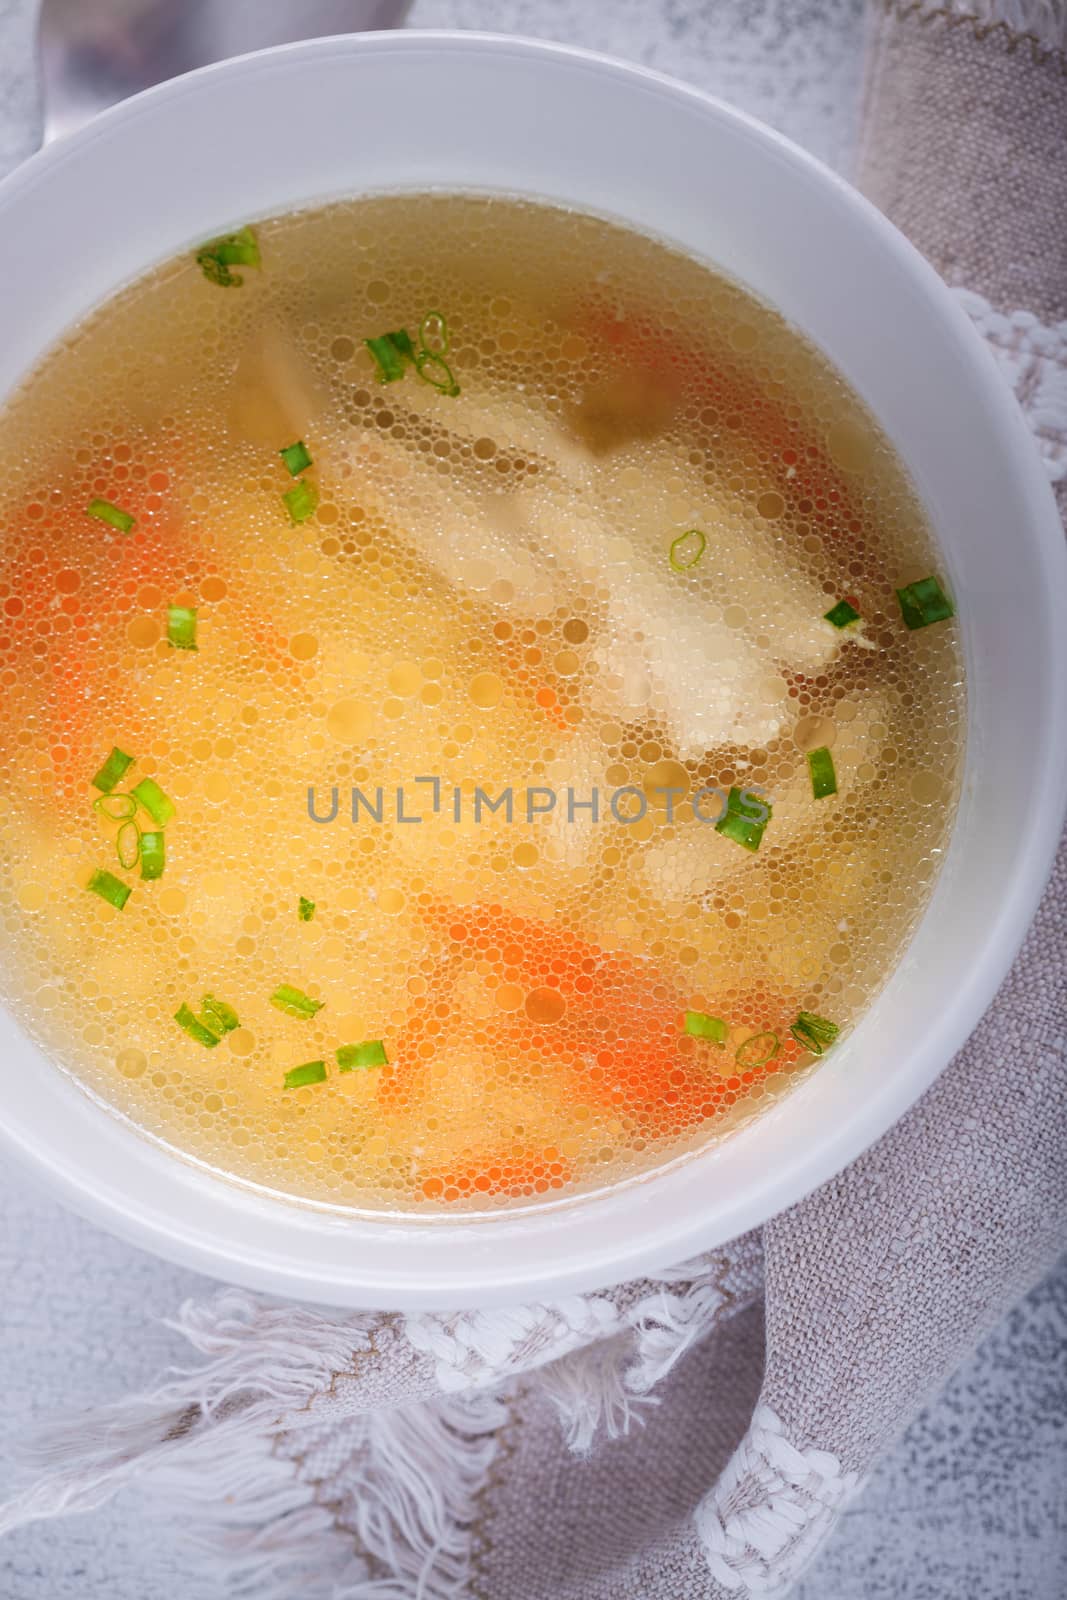 Homemade chicken soup served on a table